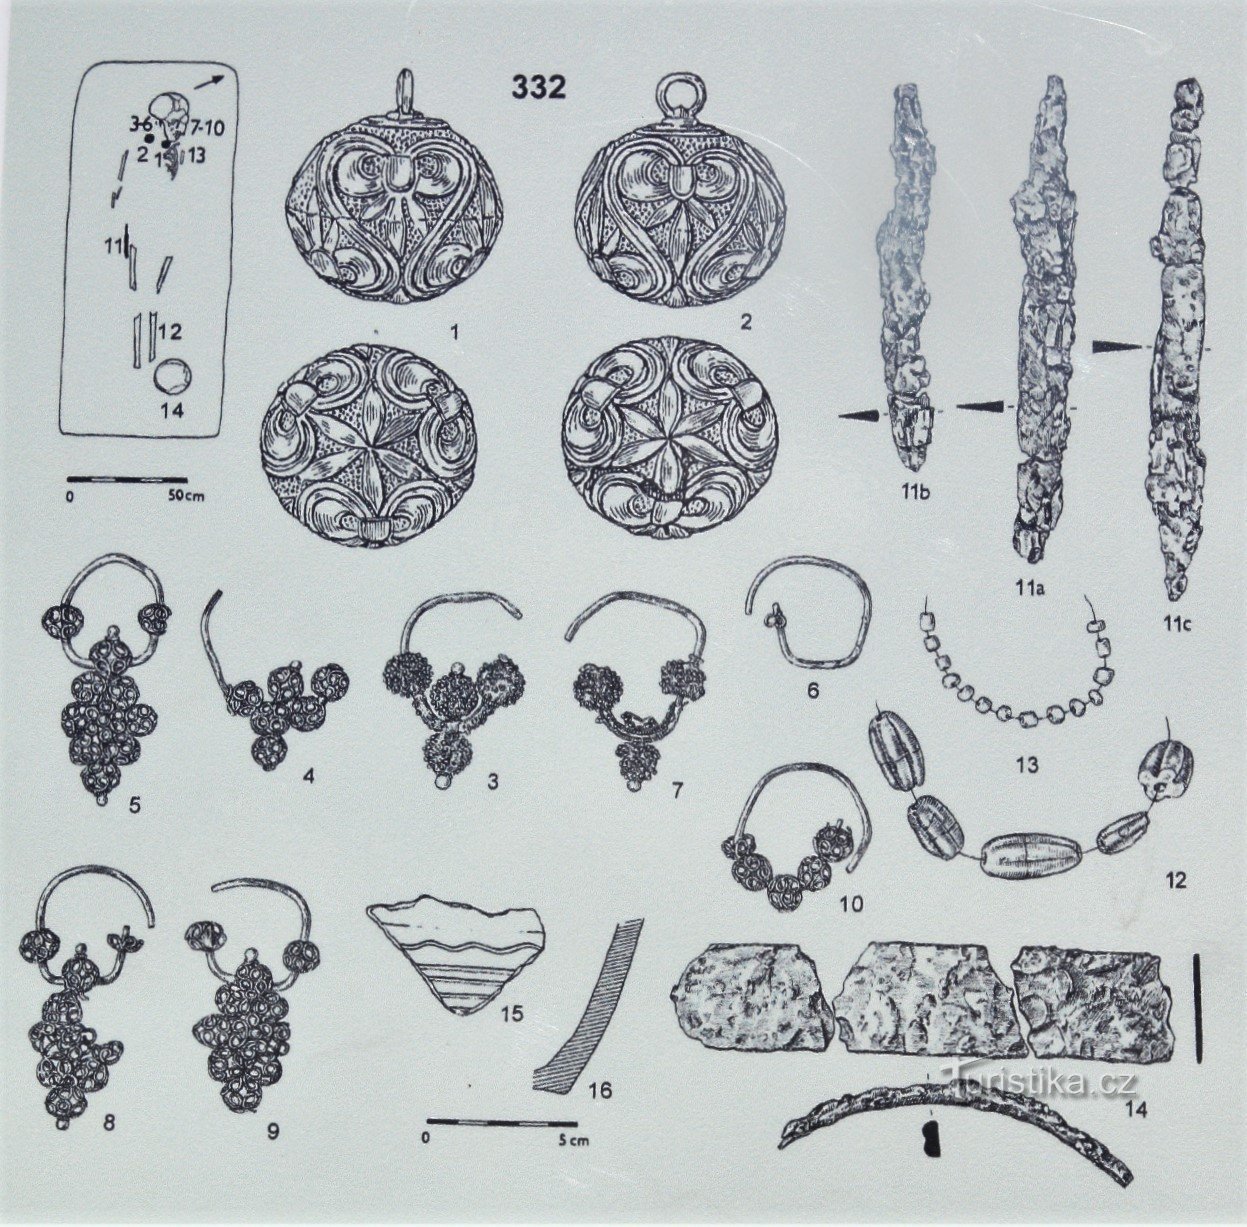 Findings of jewelry from the excavations here (taken from the information panel)